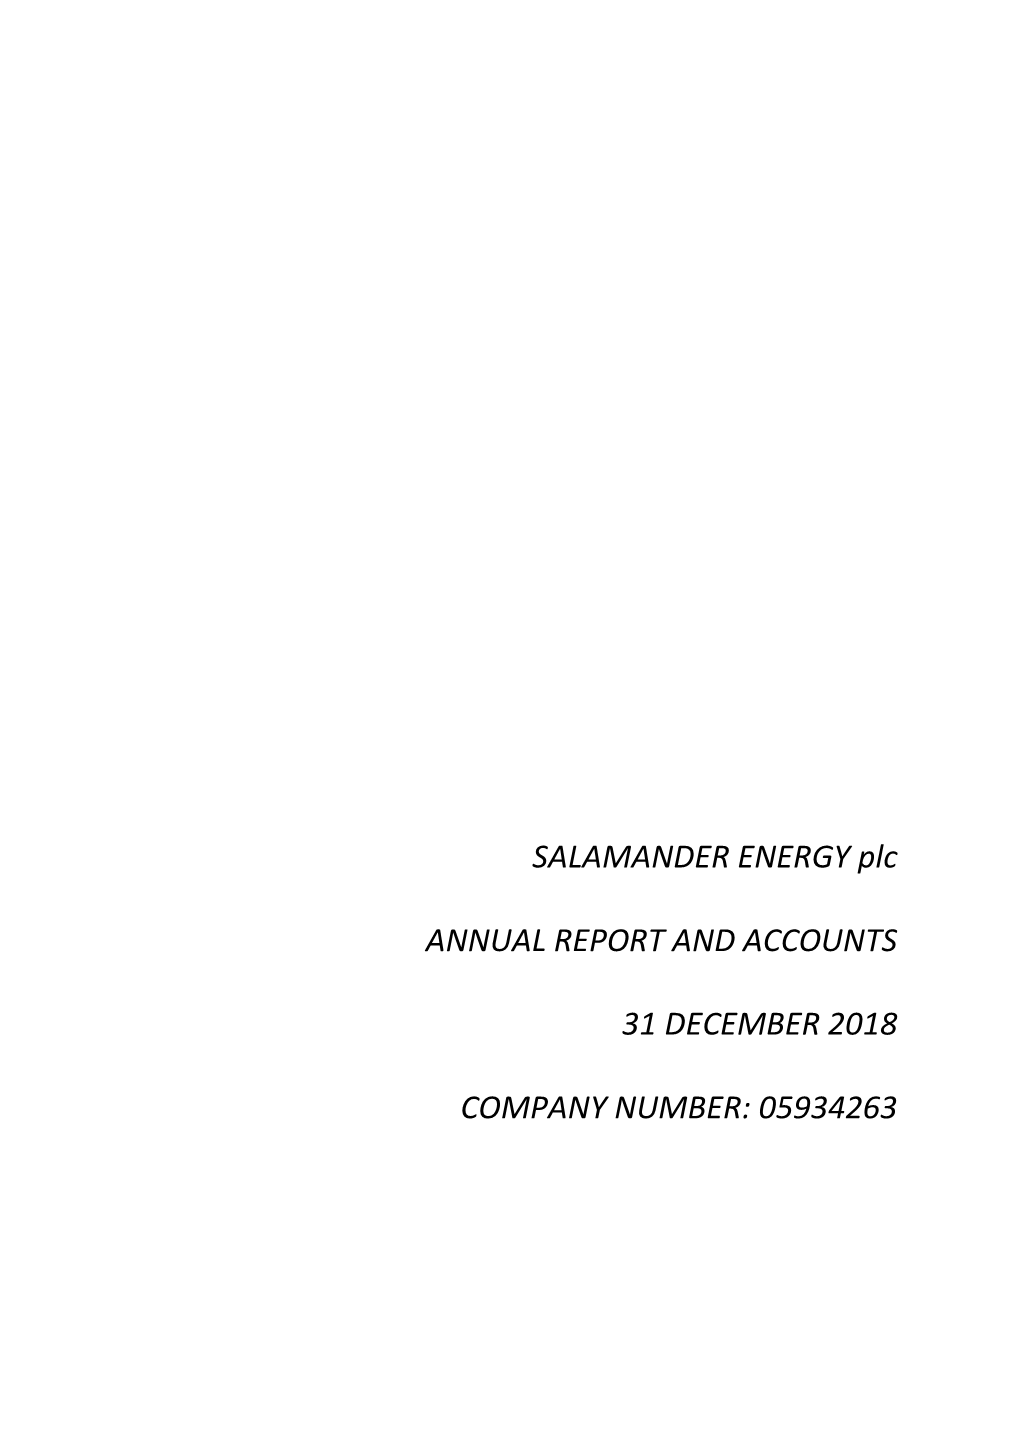 Salamander Energy Plc Annual Report and Accounts for 2018 Page 1